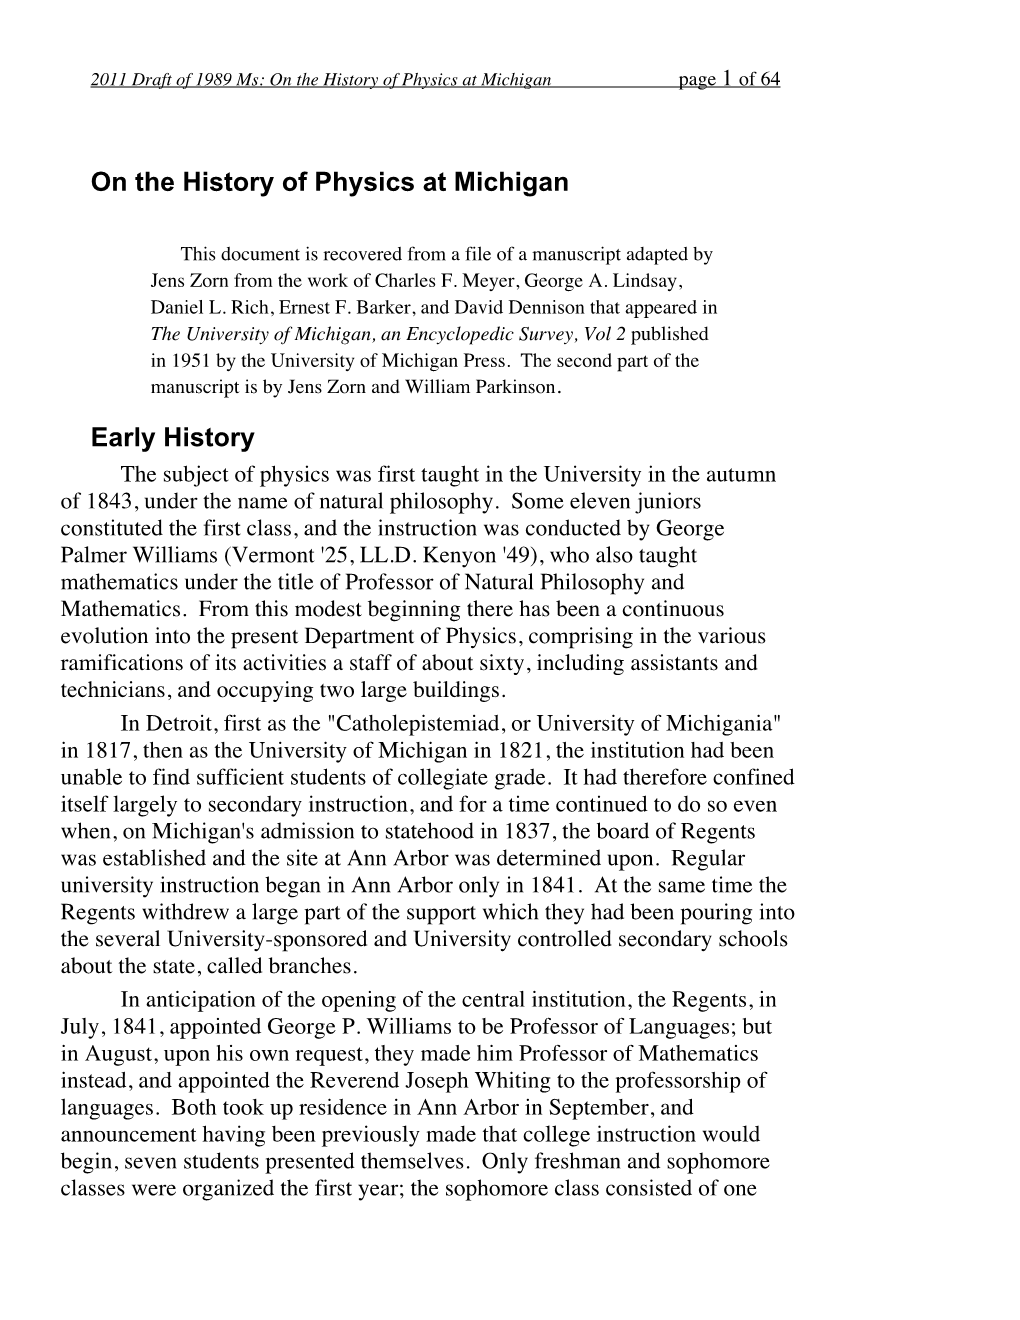 On the History of Physics at Michigan Early History